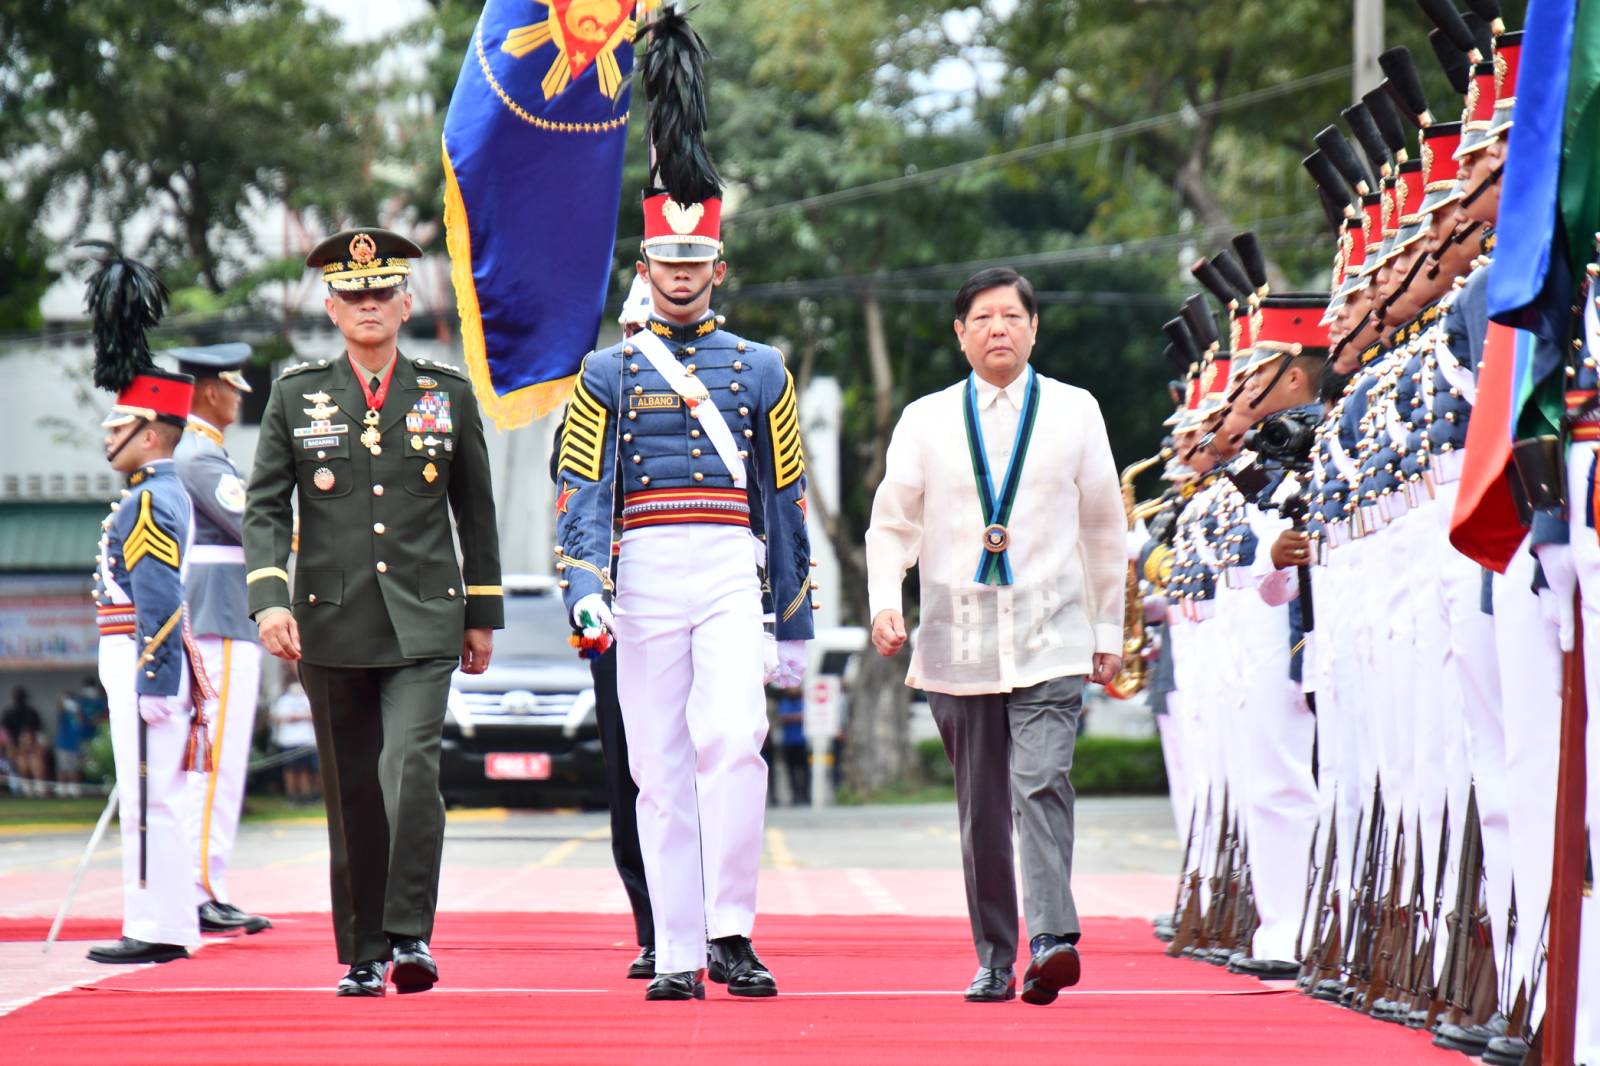 87th Anniversary Celebration of the Armed Forces of the Philippines